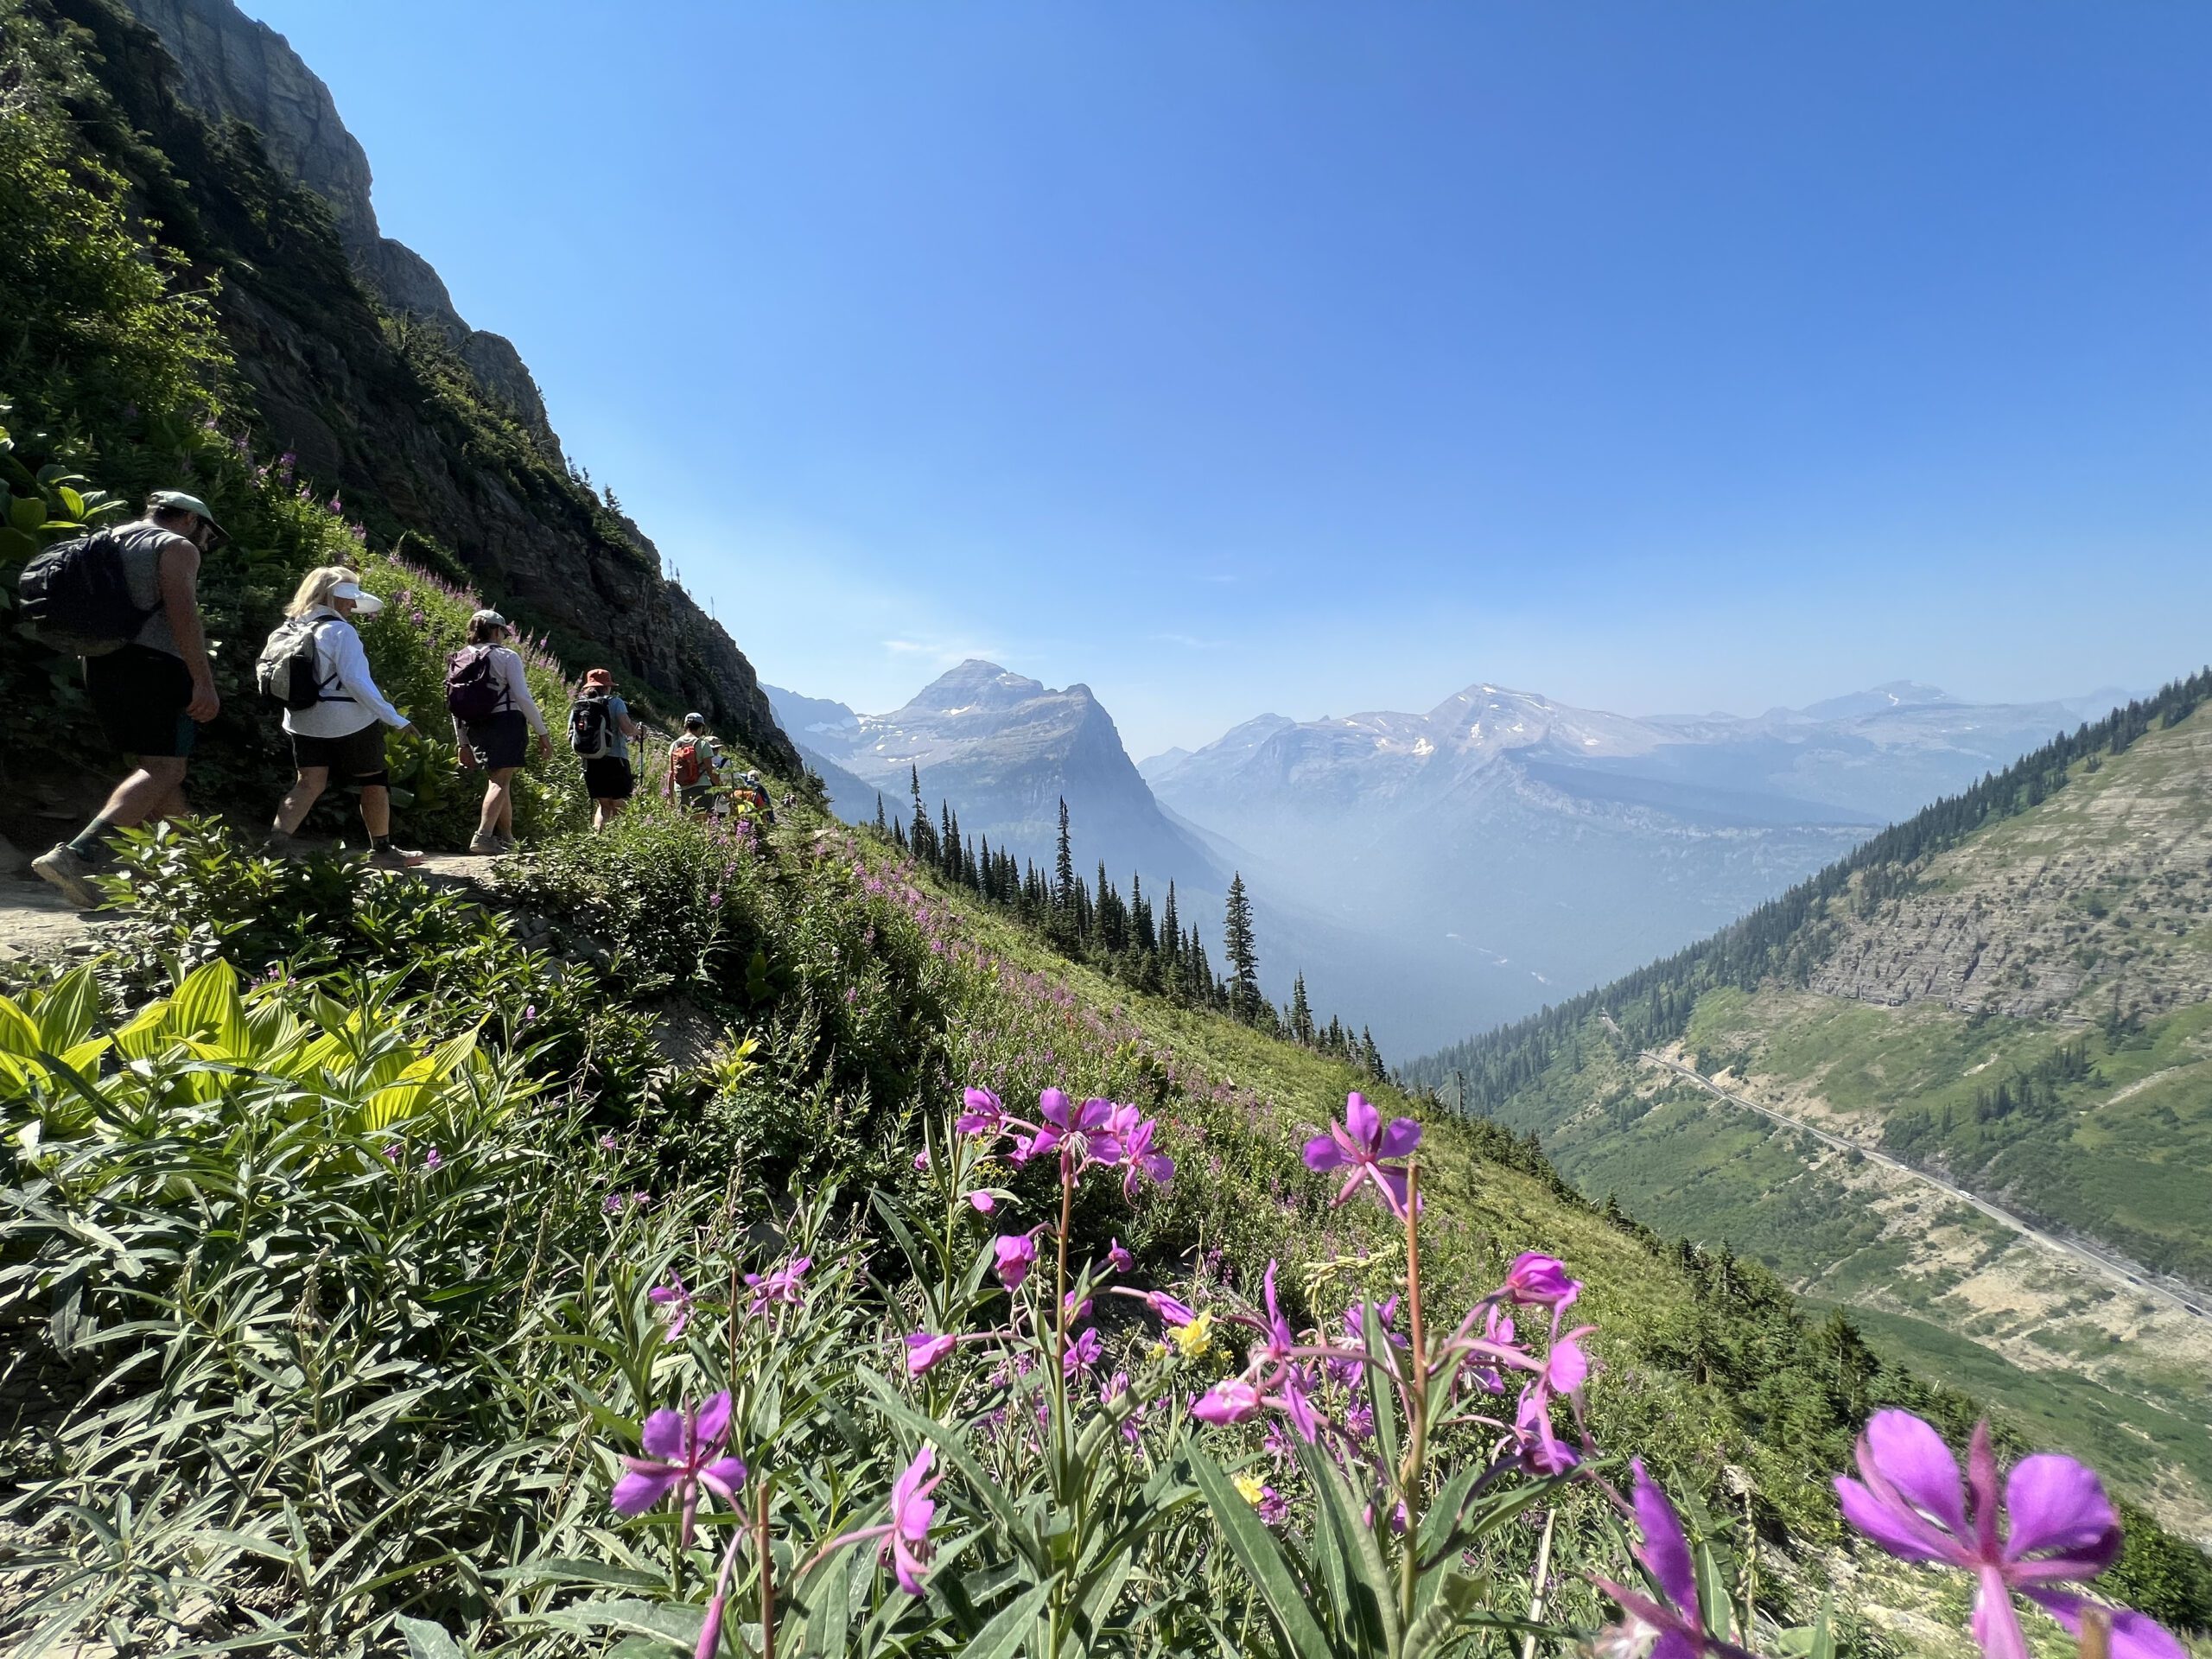 A group of hikers on a narrow trail on the side of a mountain with wildflowers in the foreground